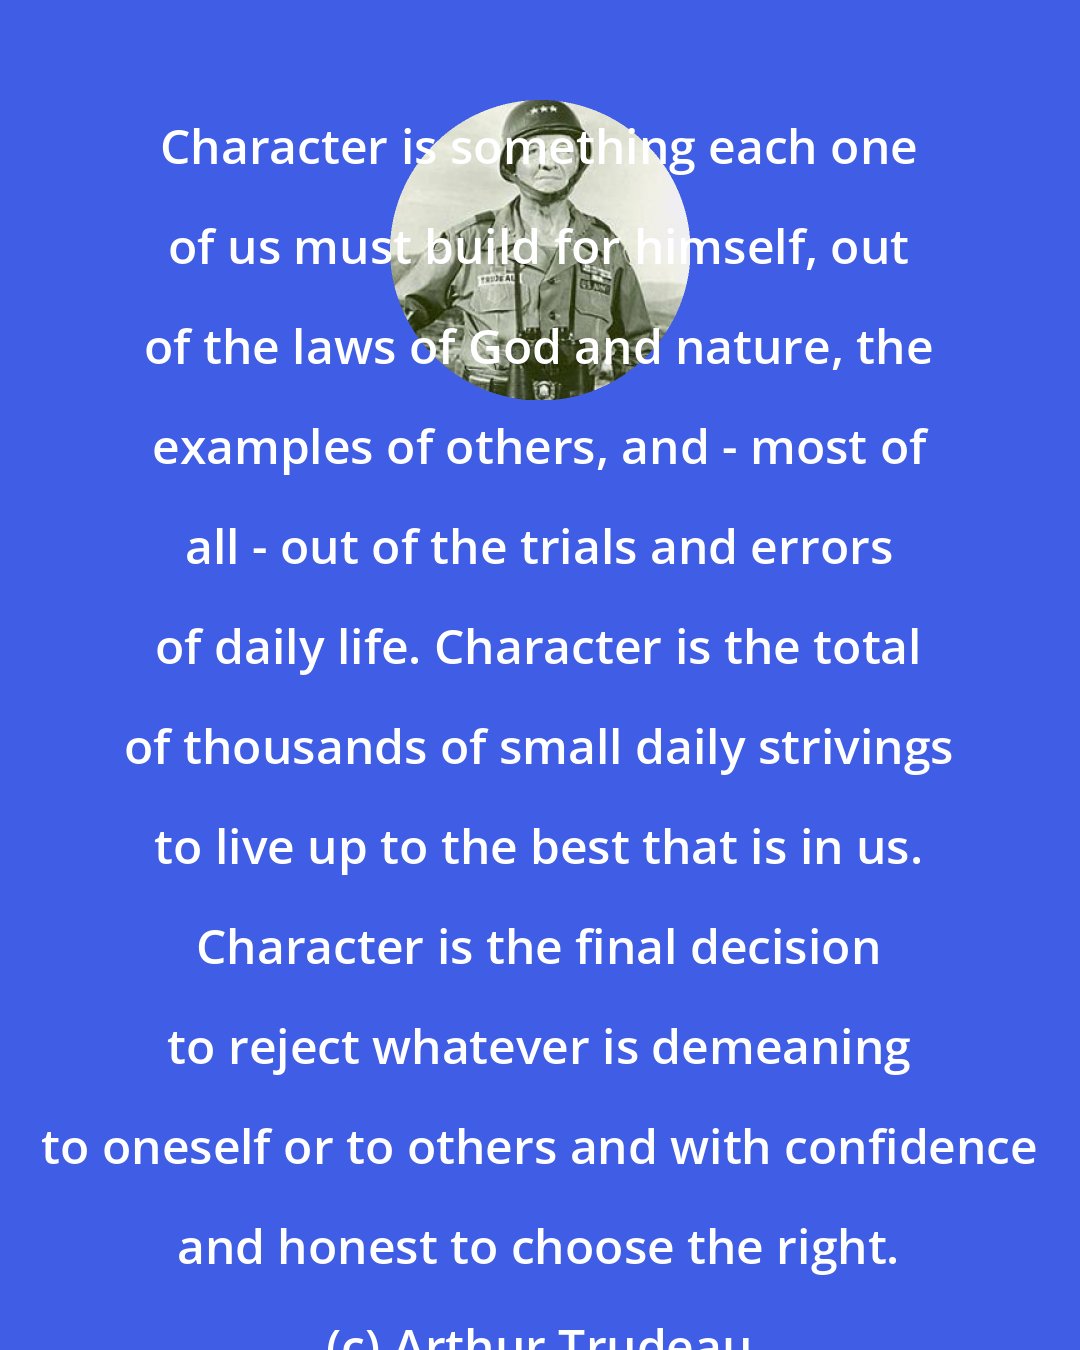 Arthur Trudeau: Character is something each one of us must build for himself, out of the laws of God and nature, the examples of others, and - most of all - out of the trials and errors of daily life. Character is the total of thousands of small daily strivings to live up to the best that is in us. Character is the final decision to reject whatever is demeaning to oneself or to others and with confidence and honest to choose the right.